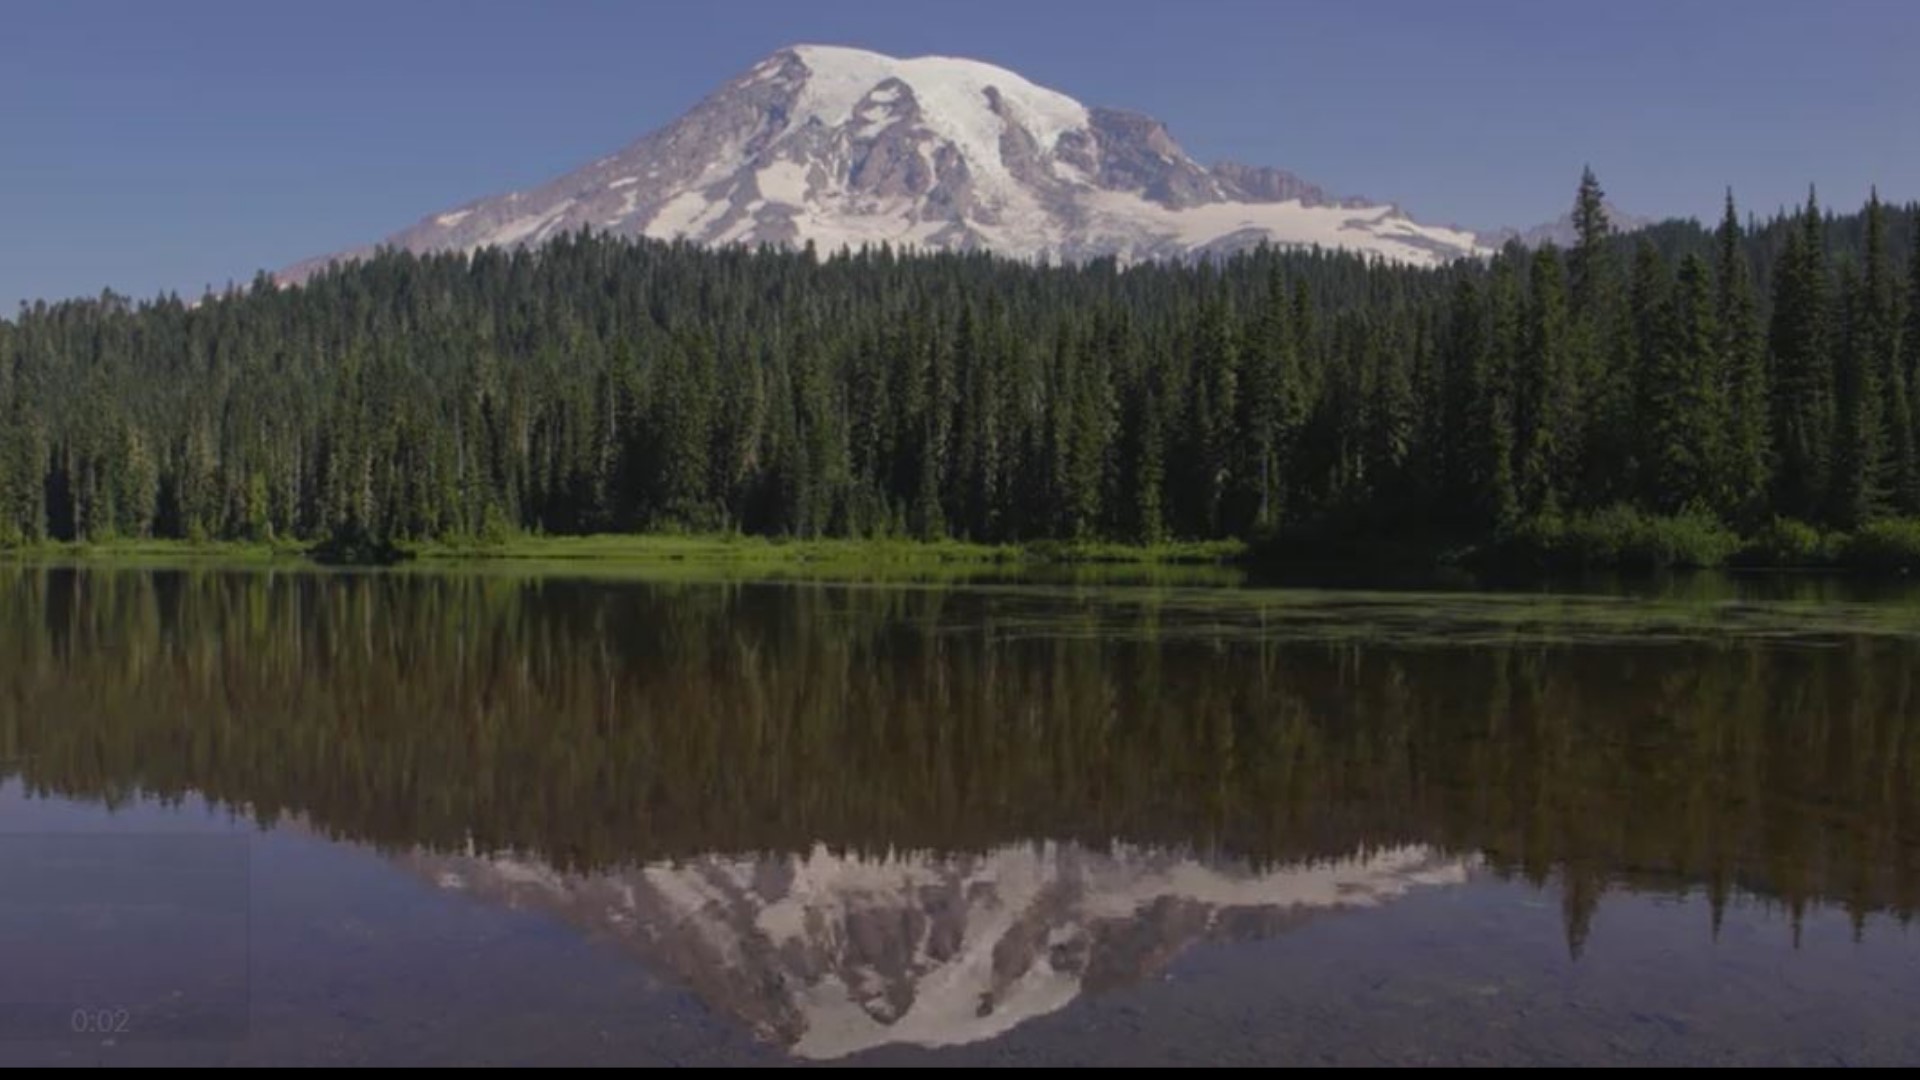 Washington's National Park Fund partnered with Mount Rainier, North Cascades, and Olympic National Parks to produce virtual tours that stream online. #k5evening